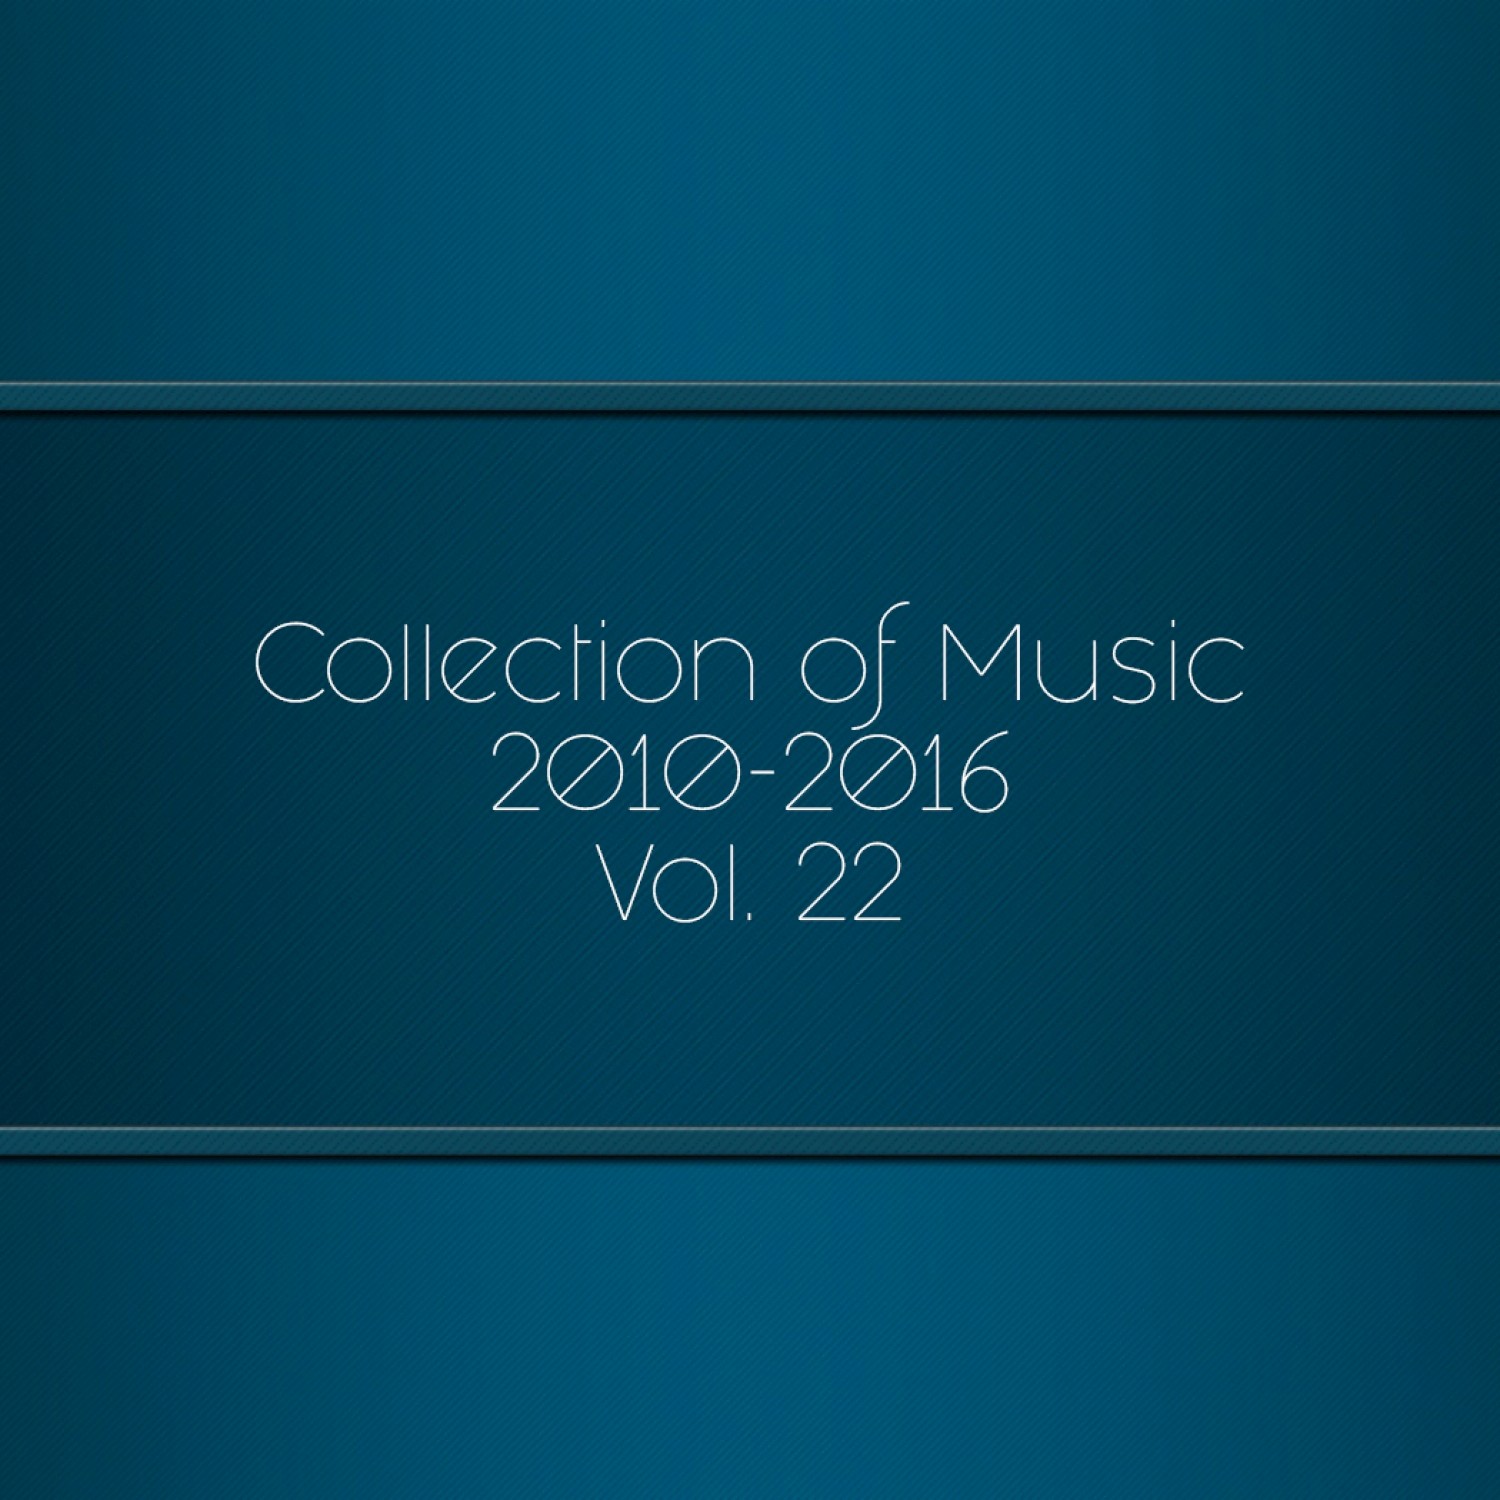 Collection of Music 2010-2016, Vol. 22